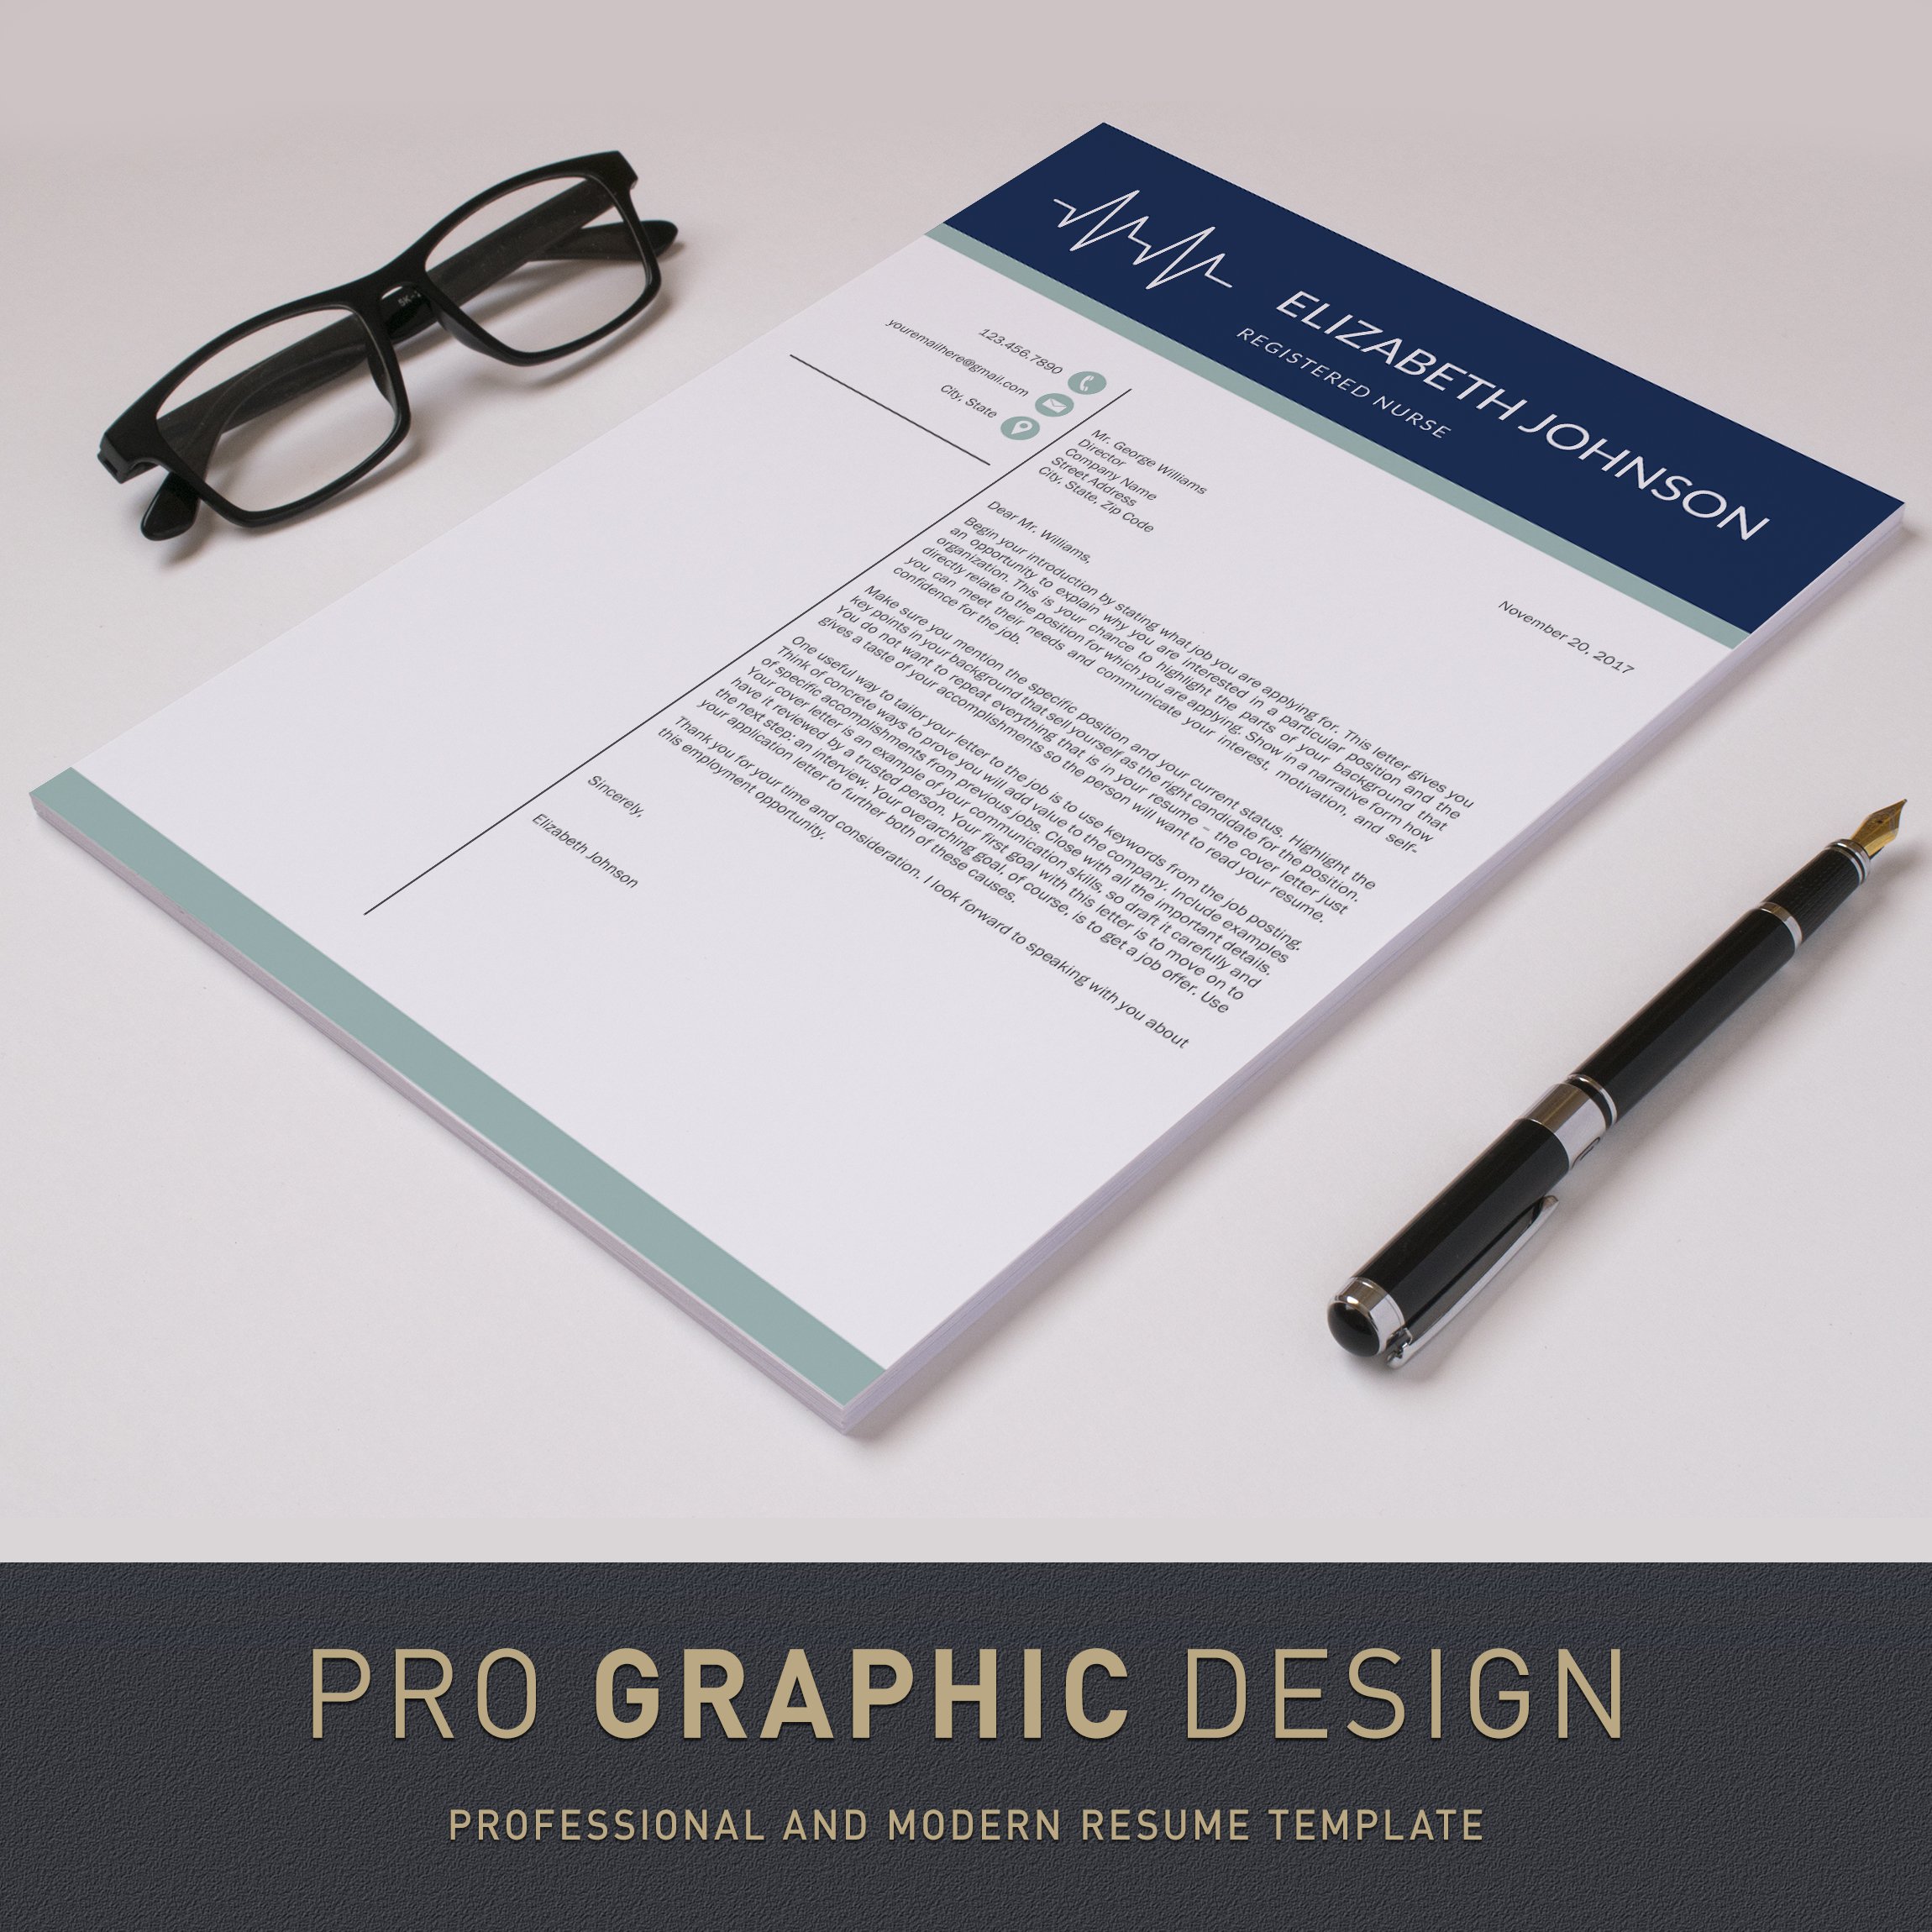 Professional and modern resume with a pen and glasses.